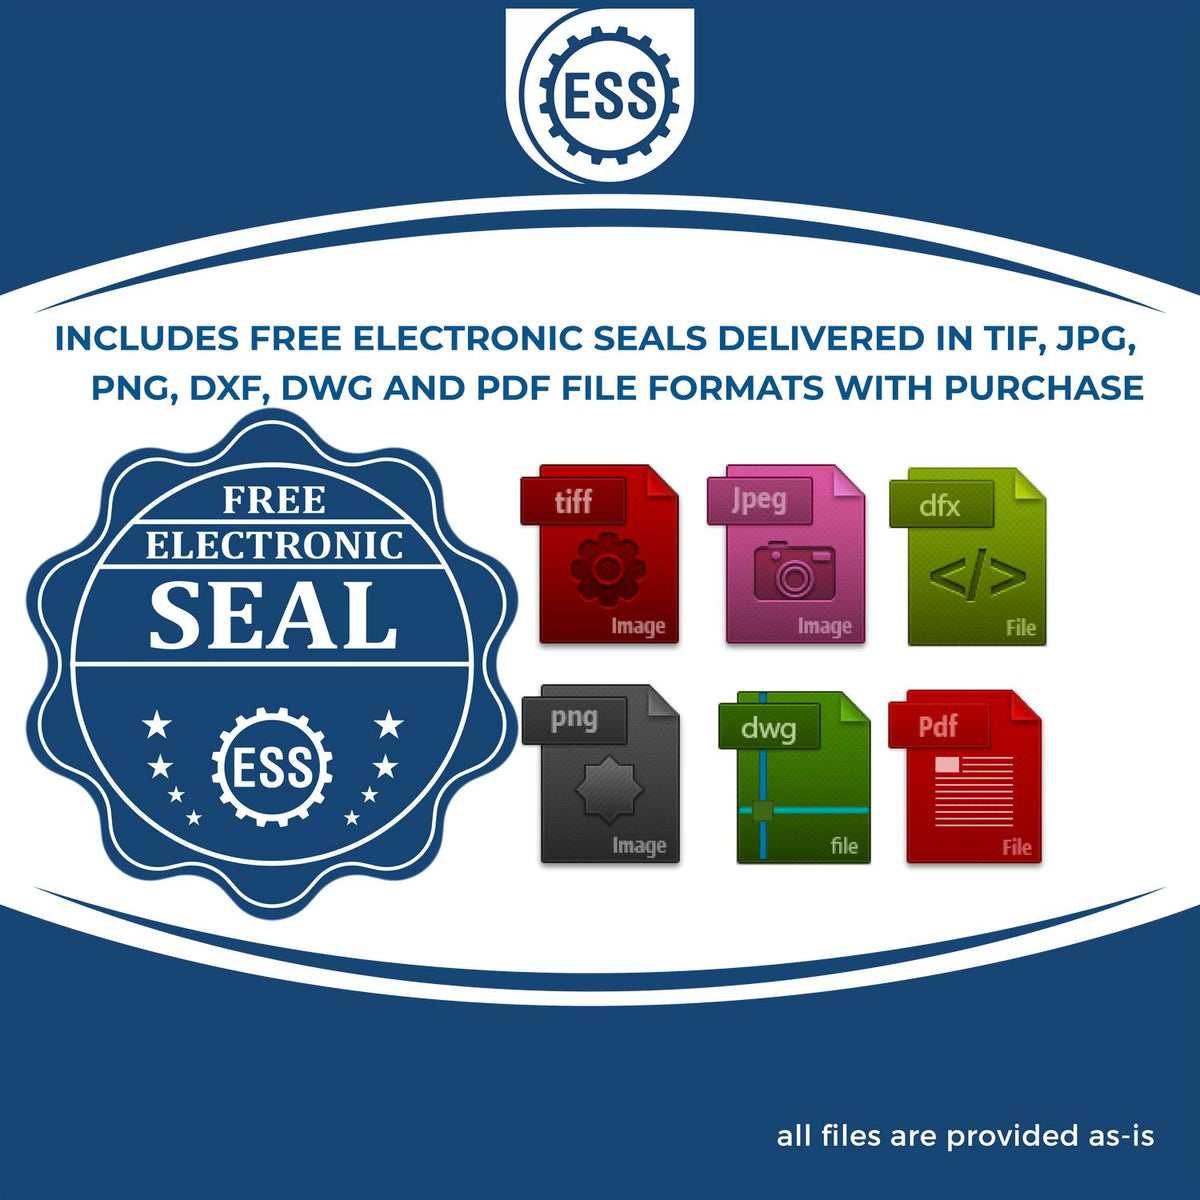 An infographic for the free electronic seal for the Premium MaxLight Pre-Inked Washington Engineering Stamp illustrating the different file type icons such as DXF, DWG, TIF, JPG and PNG.